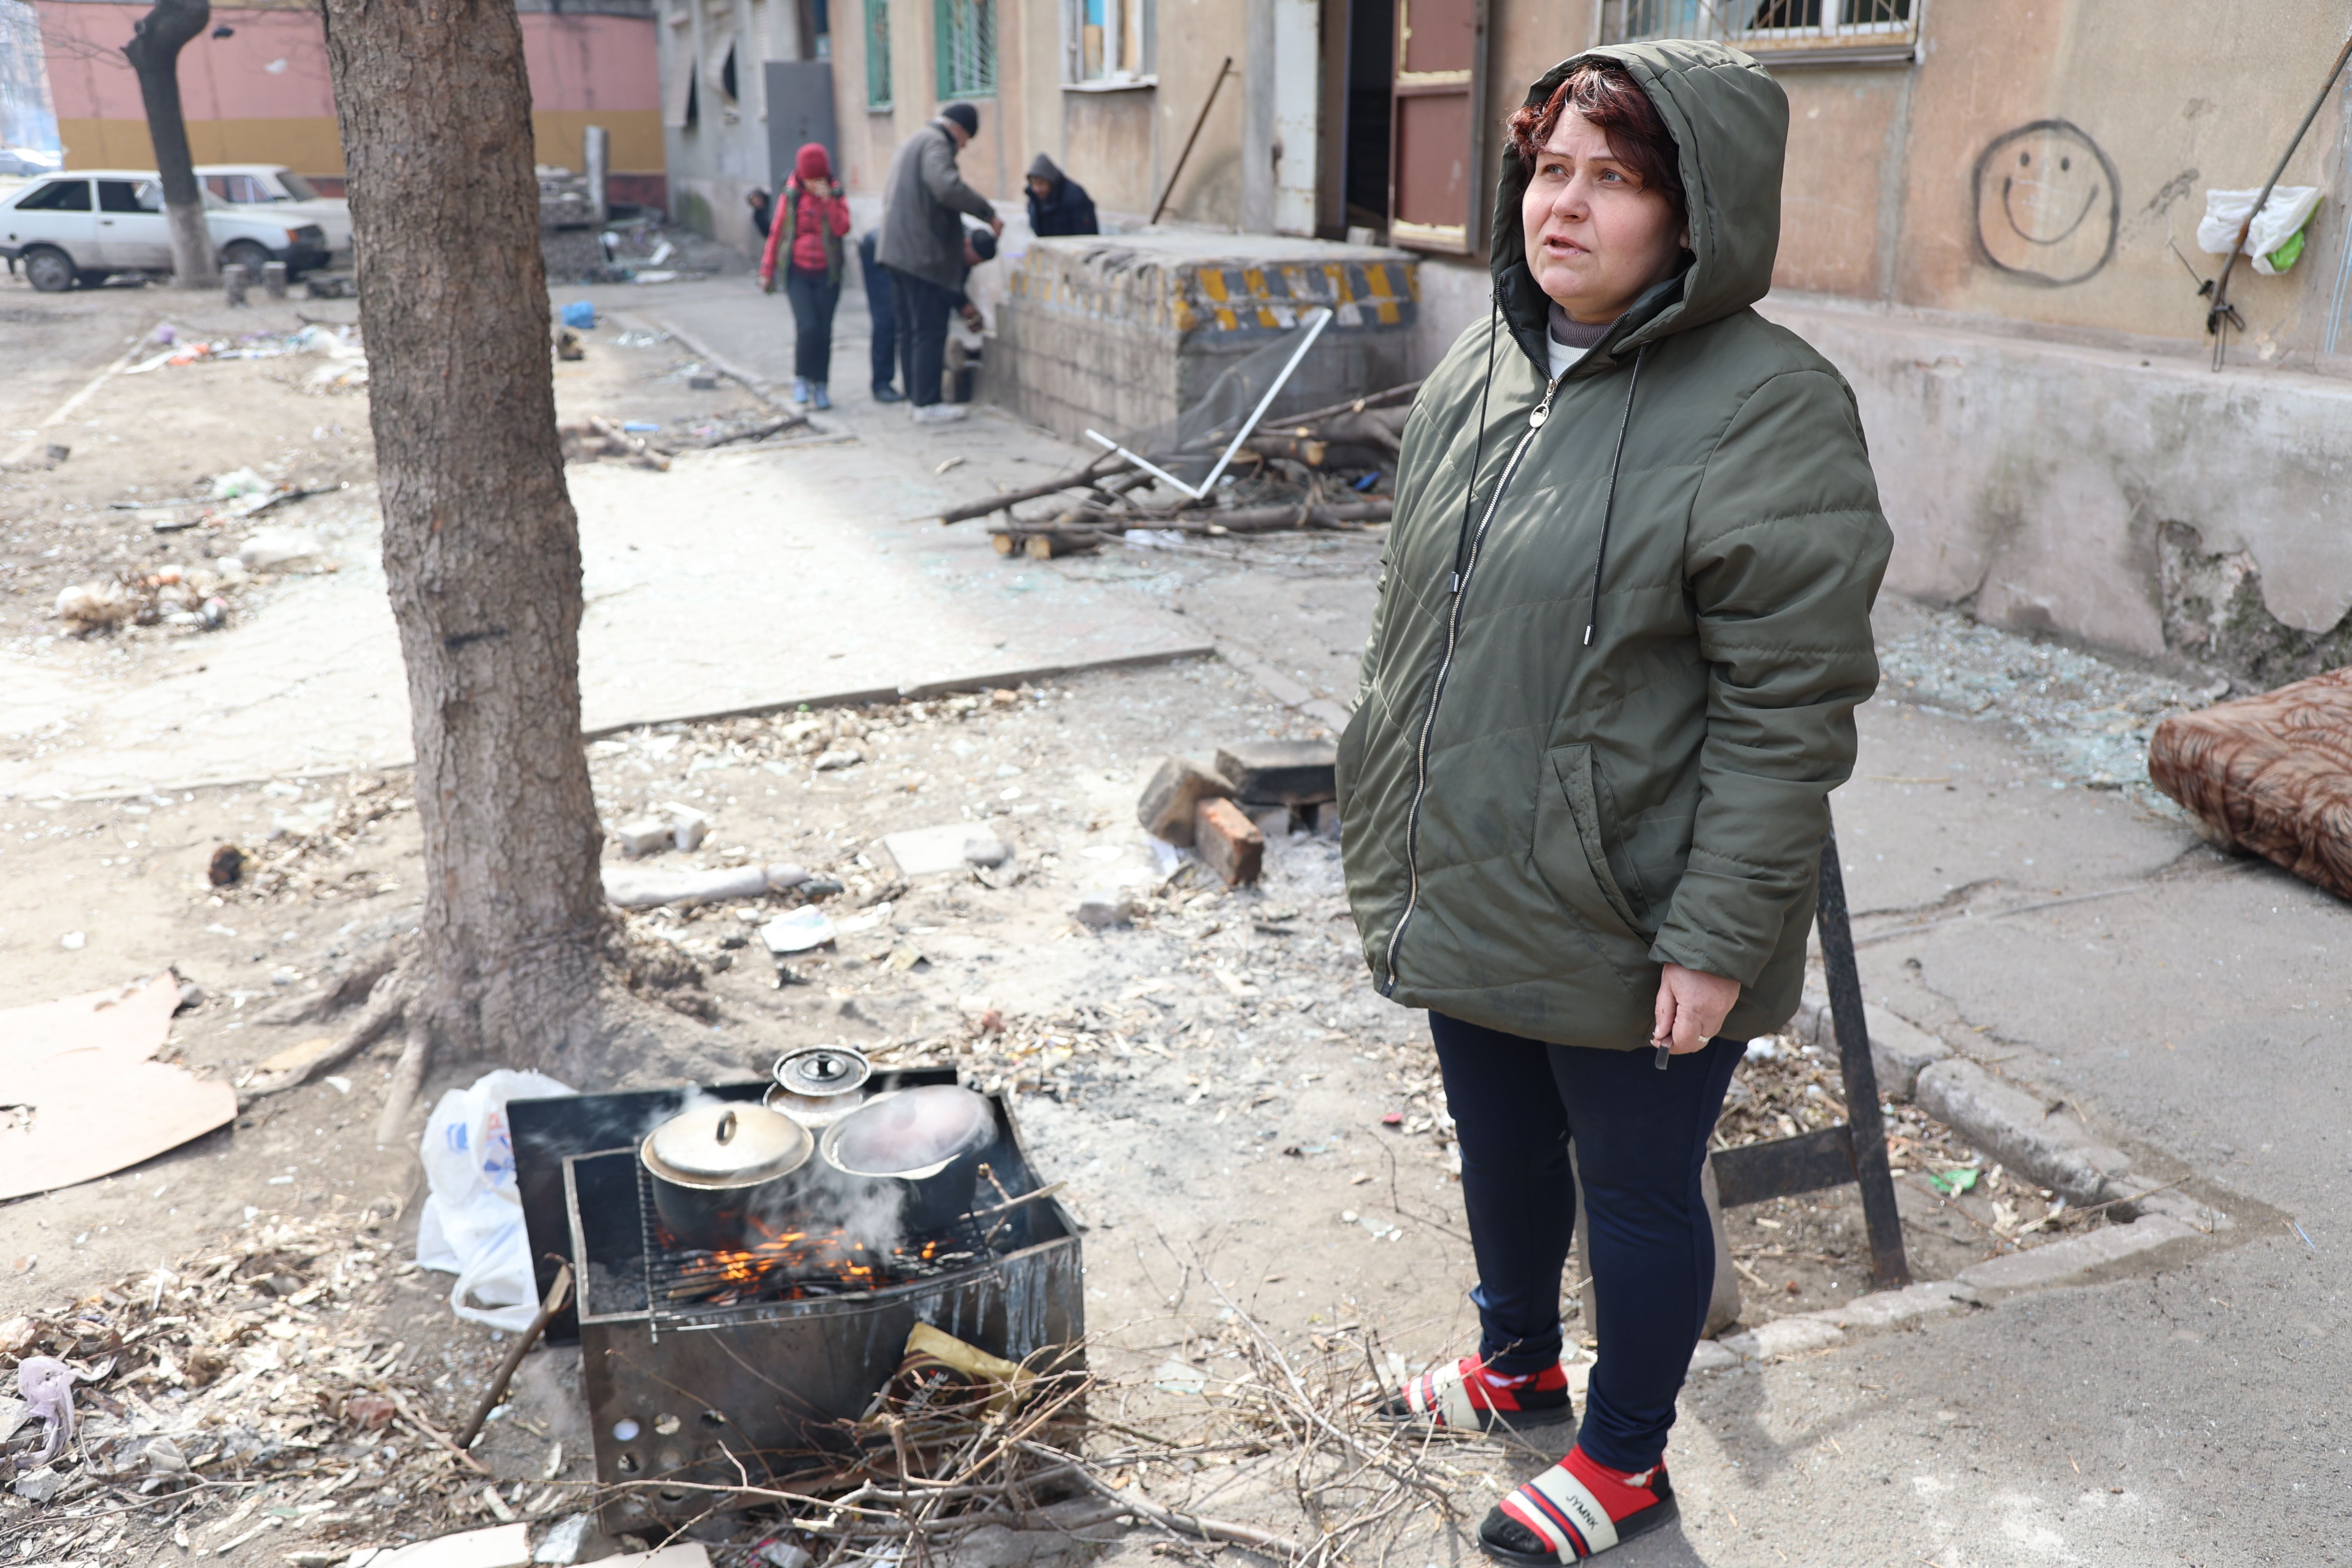 Civilians cook food amid the rubble of a bombed-out apartment in the Ukrainian city of Mariupol, which is under the control of the Russian army and pro-Russian separatists, on March 29.